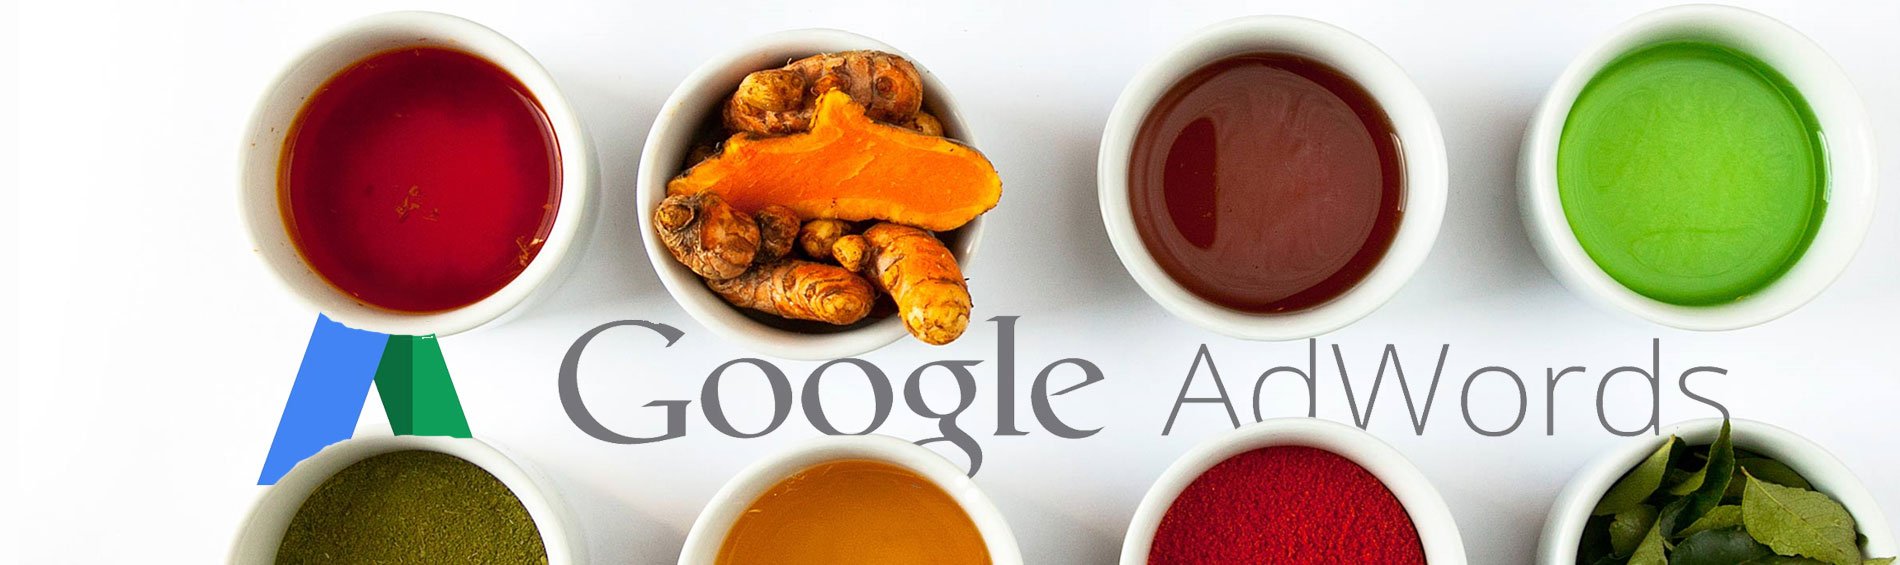 The secret ingredients for a perfect Google AdWords campaign recipe